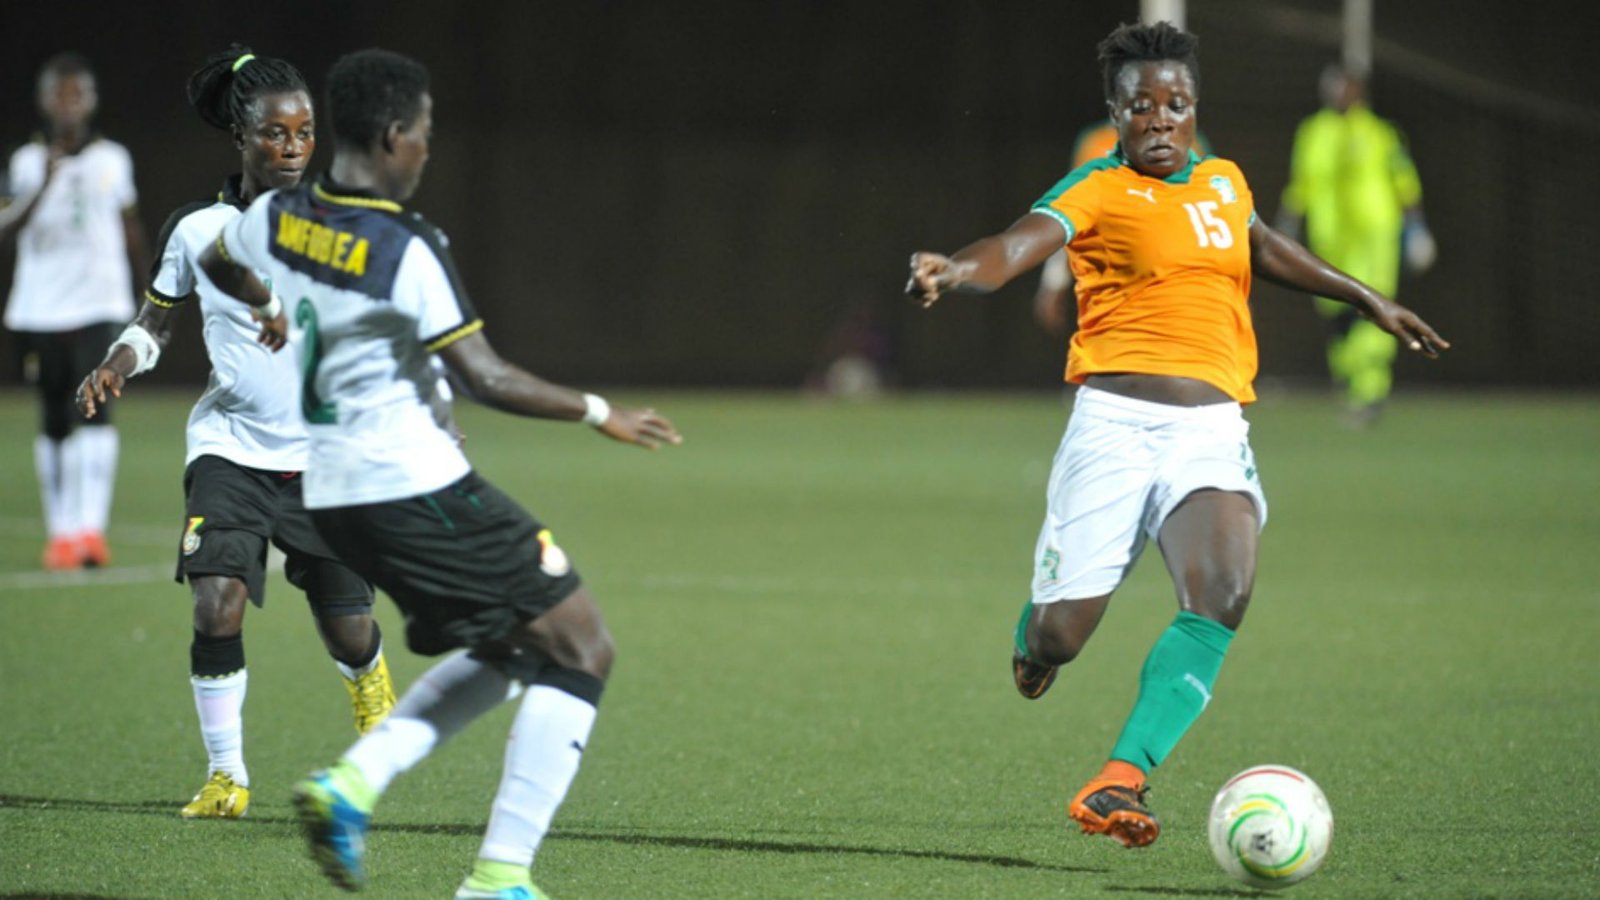 West Africa Football Union (WAFU) Women’s Cup dates announced - Sports Leo